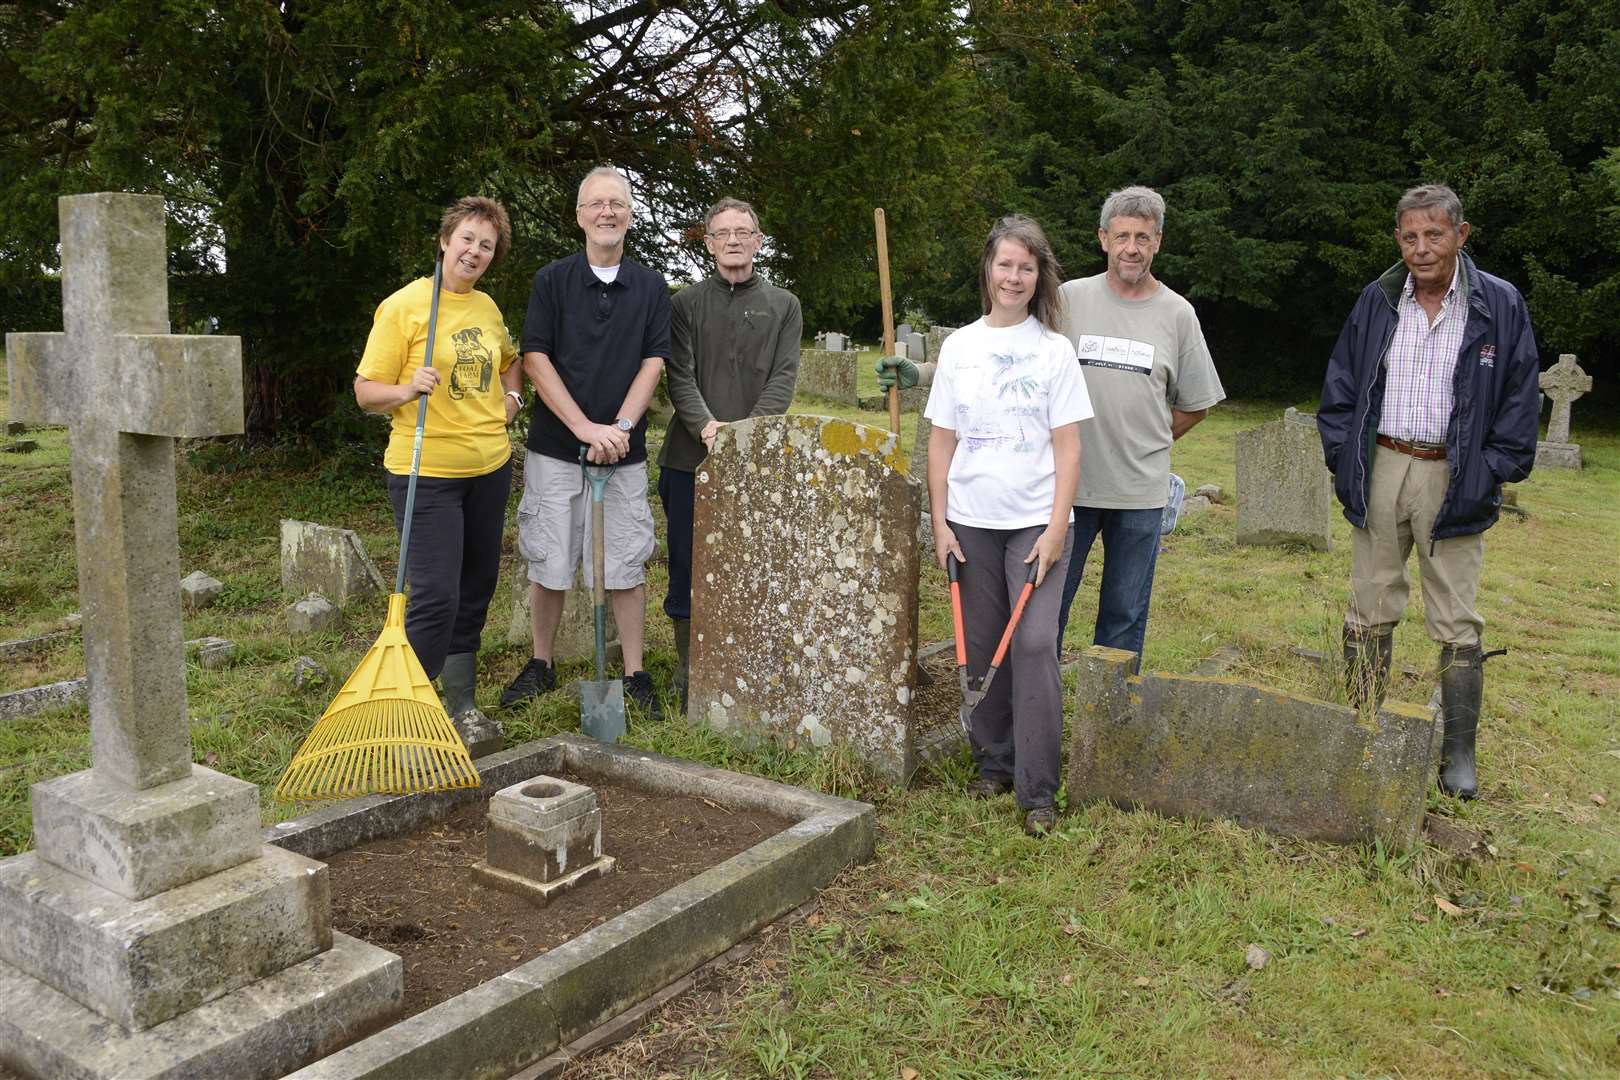 Members of the Hothfield History Society stand by the mysterious headstone. Pictured is Sharon Butler, Richard Hull, Nick Wheat, Sheila Flynn, Chris Rogers and Martin Crompton